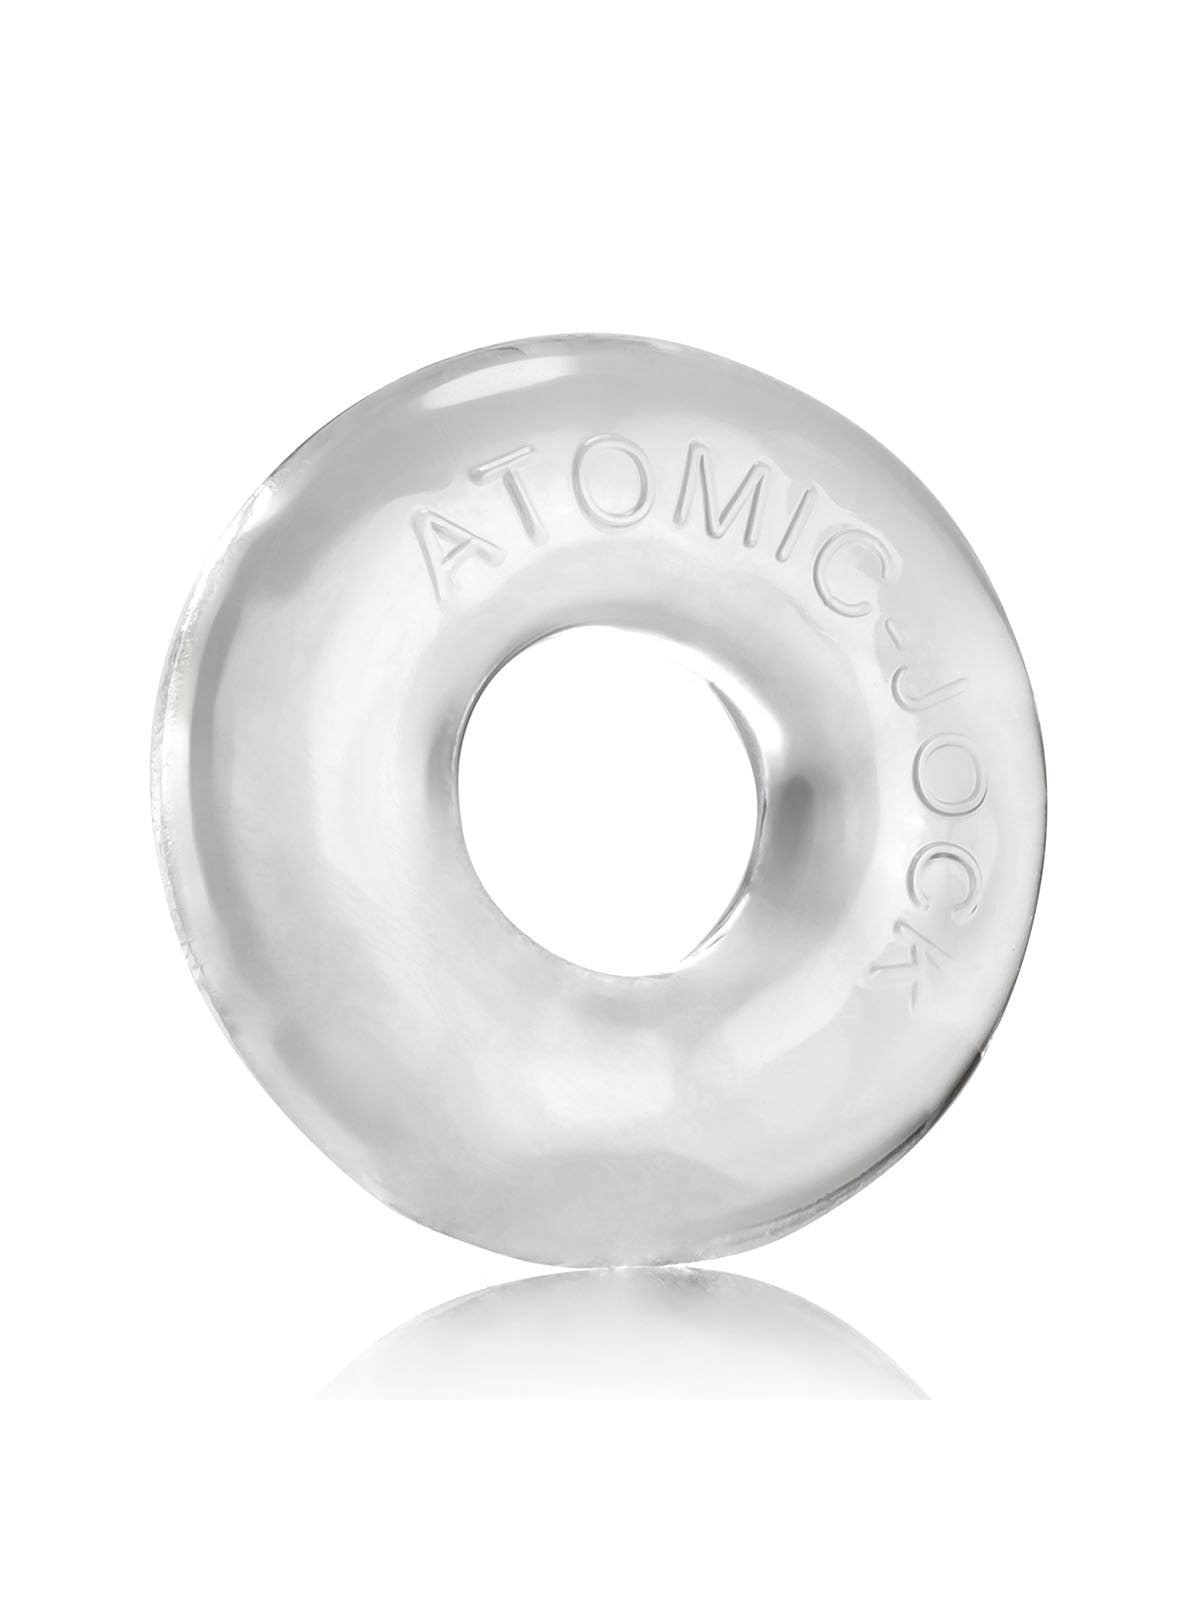 White Do-Nut 2 Cock Ring by Oxballs